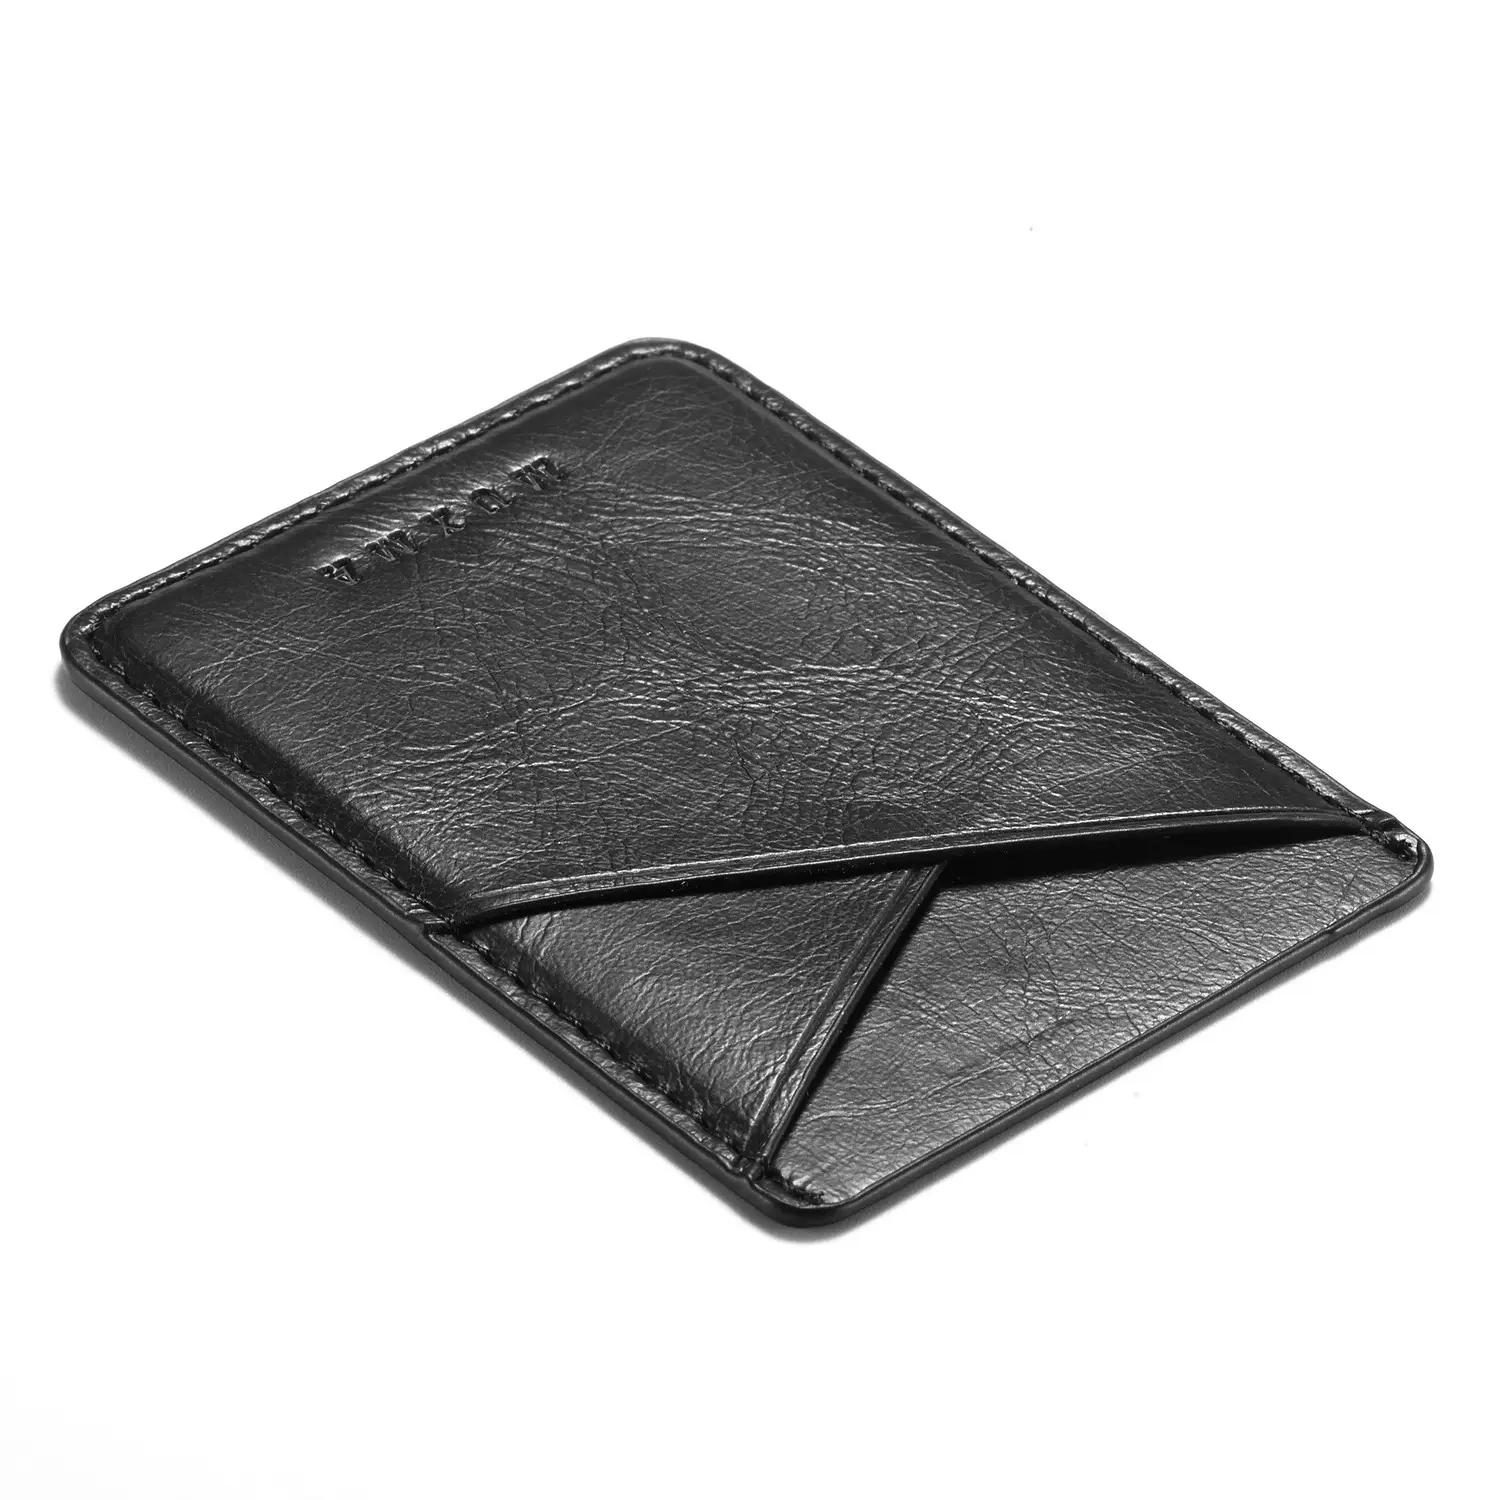 Phone Card Holder RFID Blocking Sleeve Pu Leather Back Phone Wallet Stick-On Pull up 5 Card Holder Universally Pocket Covers